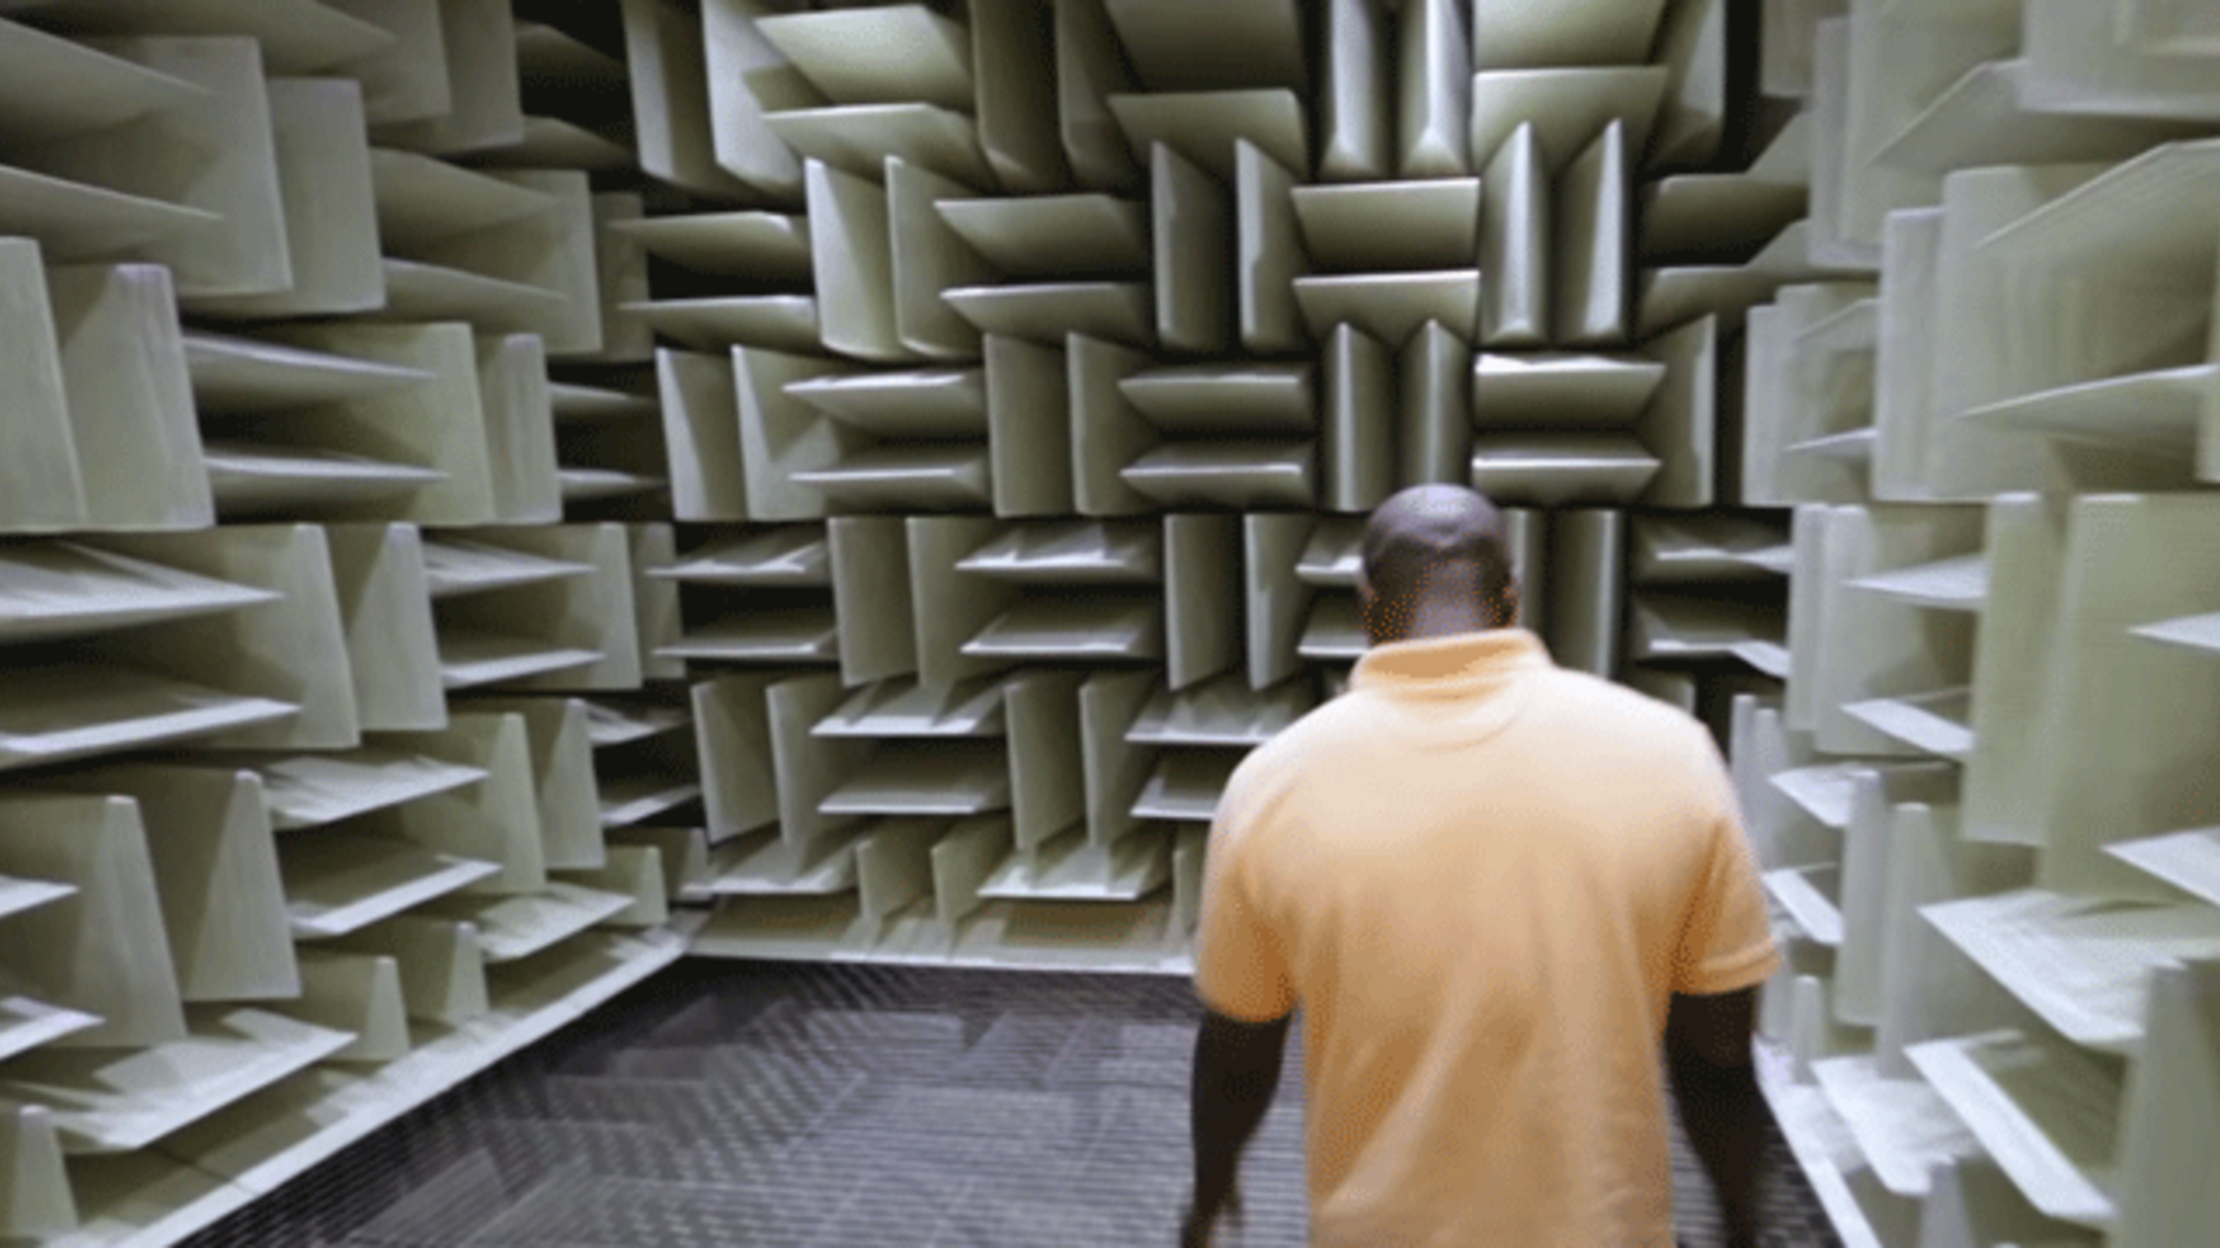 Microsoft Audio Lab Named World S Quietest Place Mental Floss